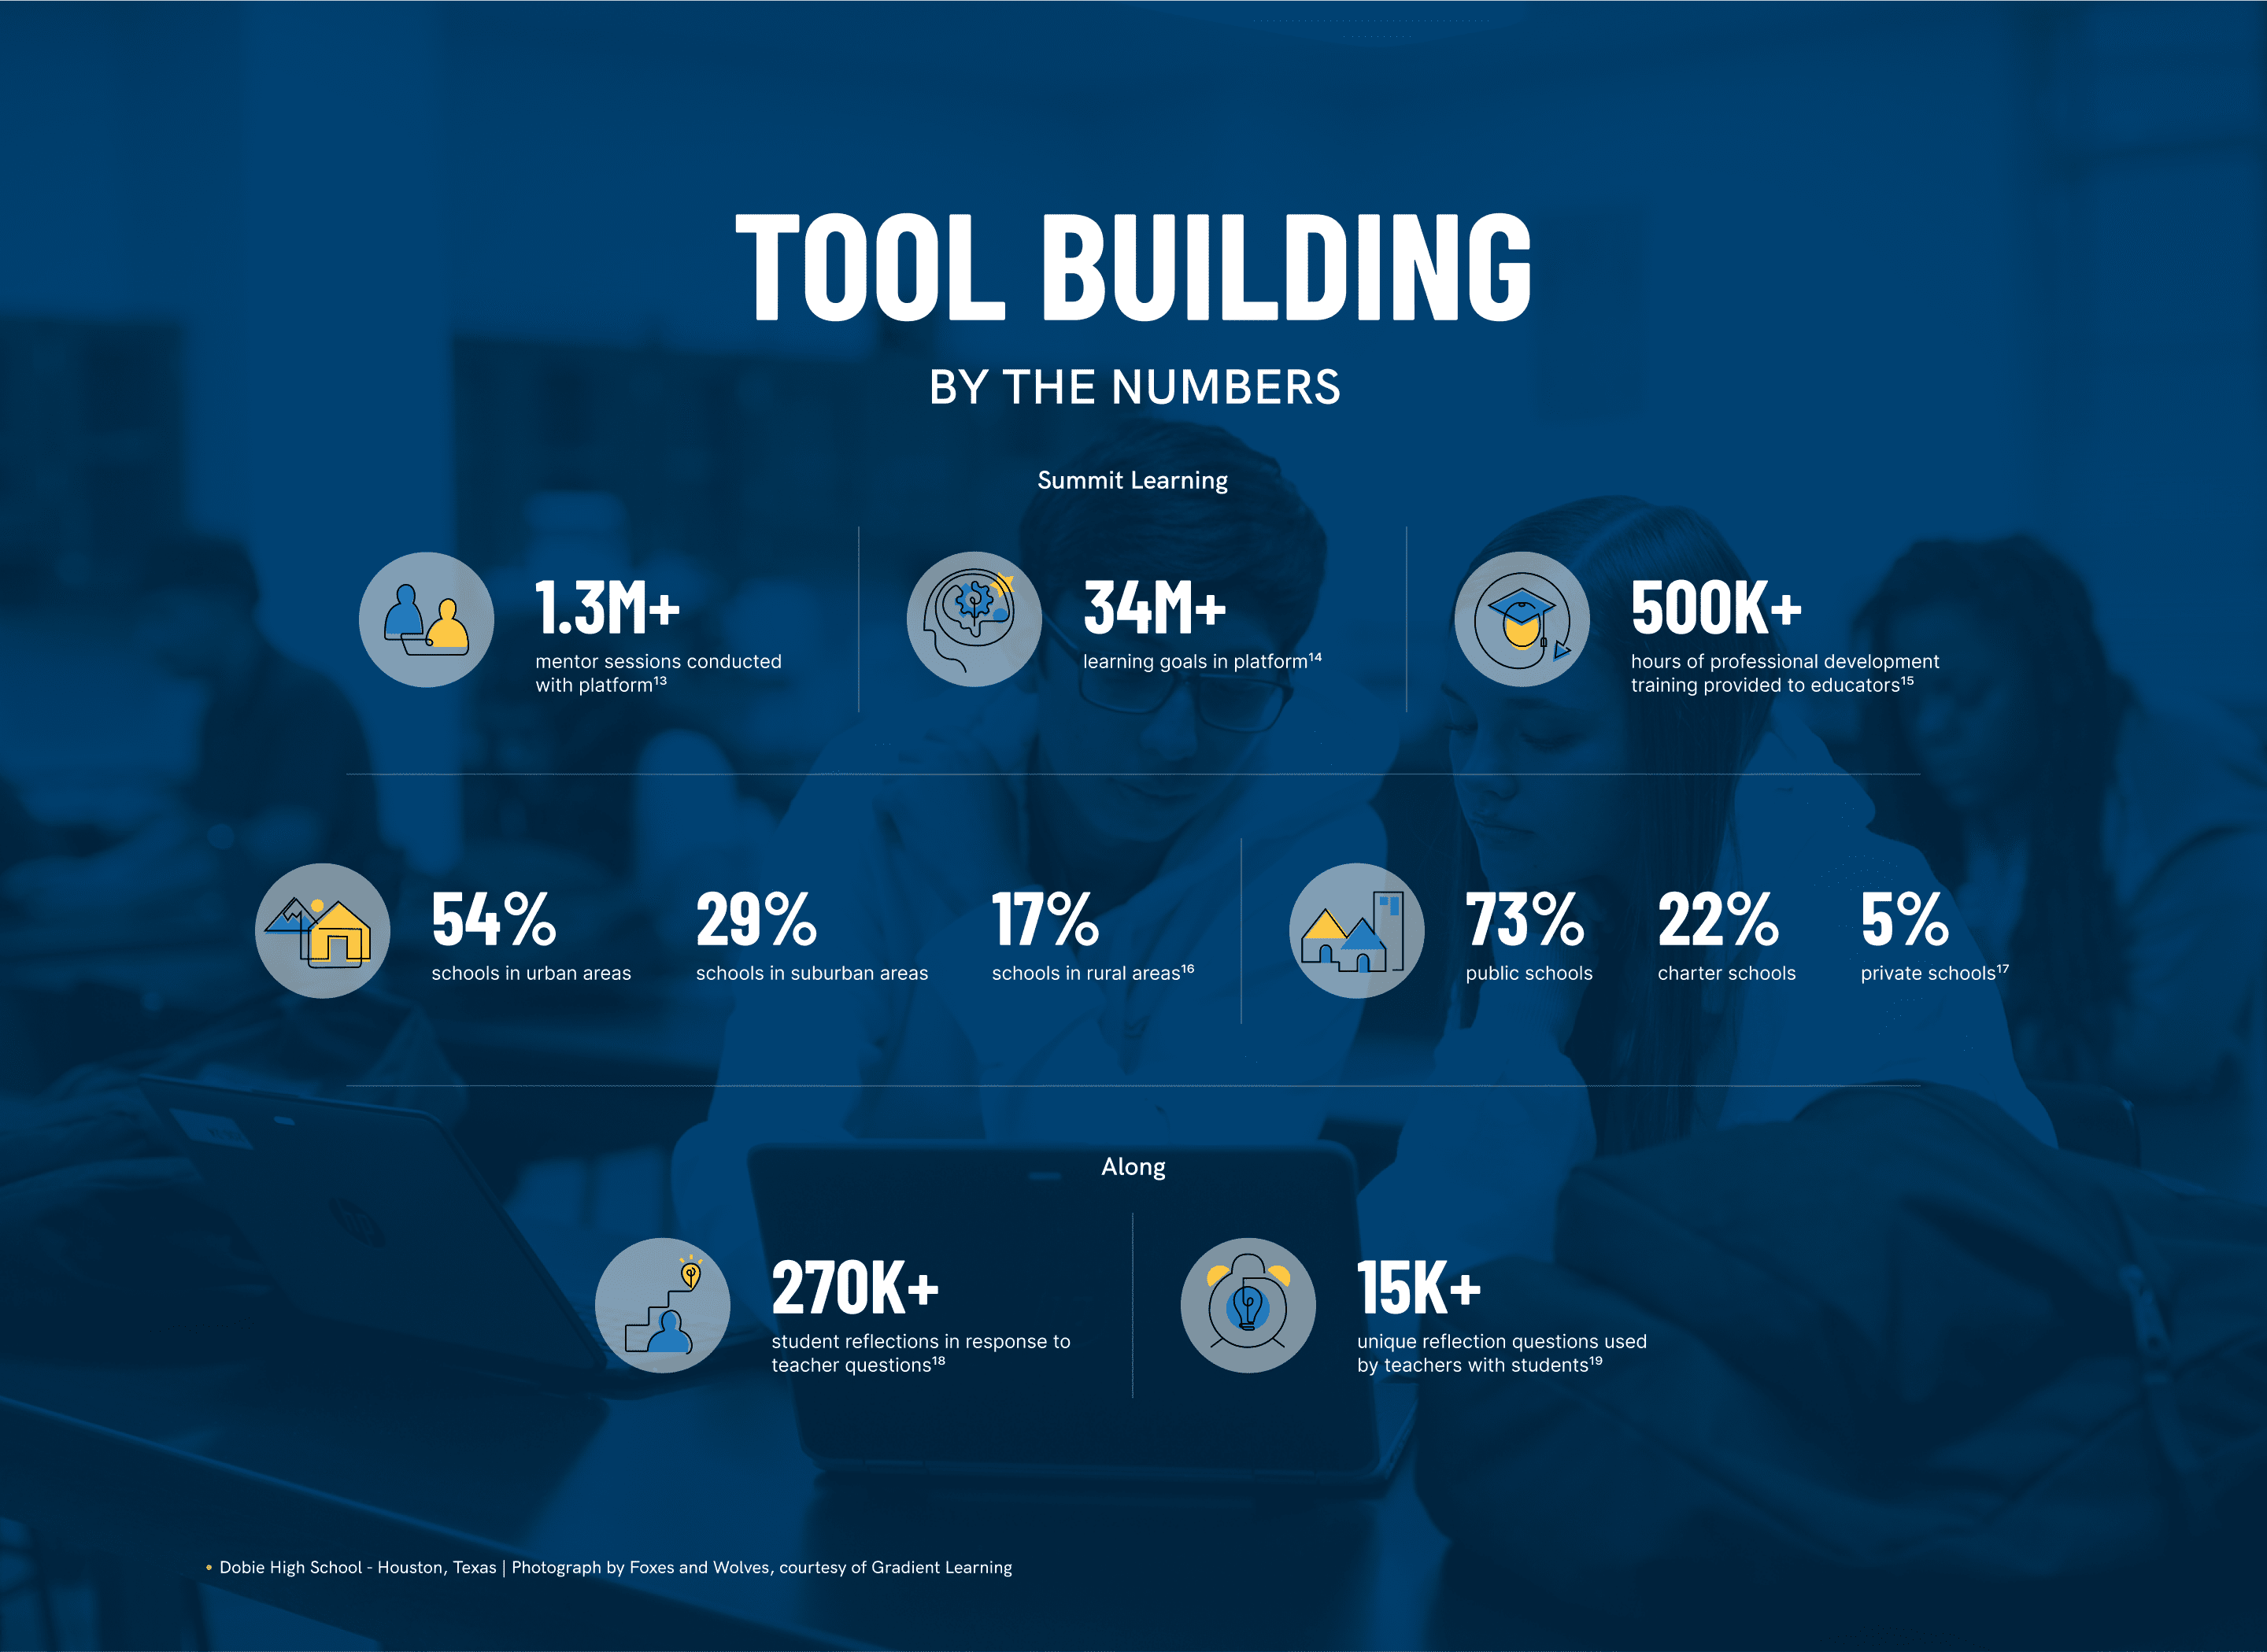 Infographic of CZI Education titled Tool Building By the numbers. Summit Learning conducted 1.3 million+ mentor sessions with 34 million+ learning goals, 500 thousand+ hours professional development training to educators. Usage: 54% urban schools, 29% suburban schools, 17% rural areas; 73% public, 22% charter, 5% private schools. Along garnered 270 thousand+ student reflection questions.